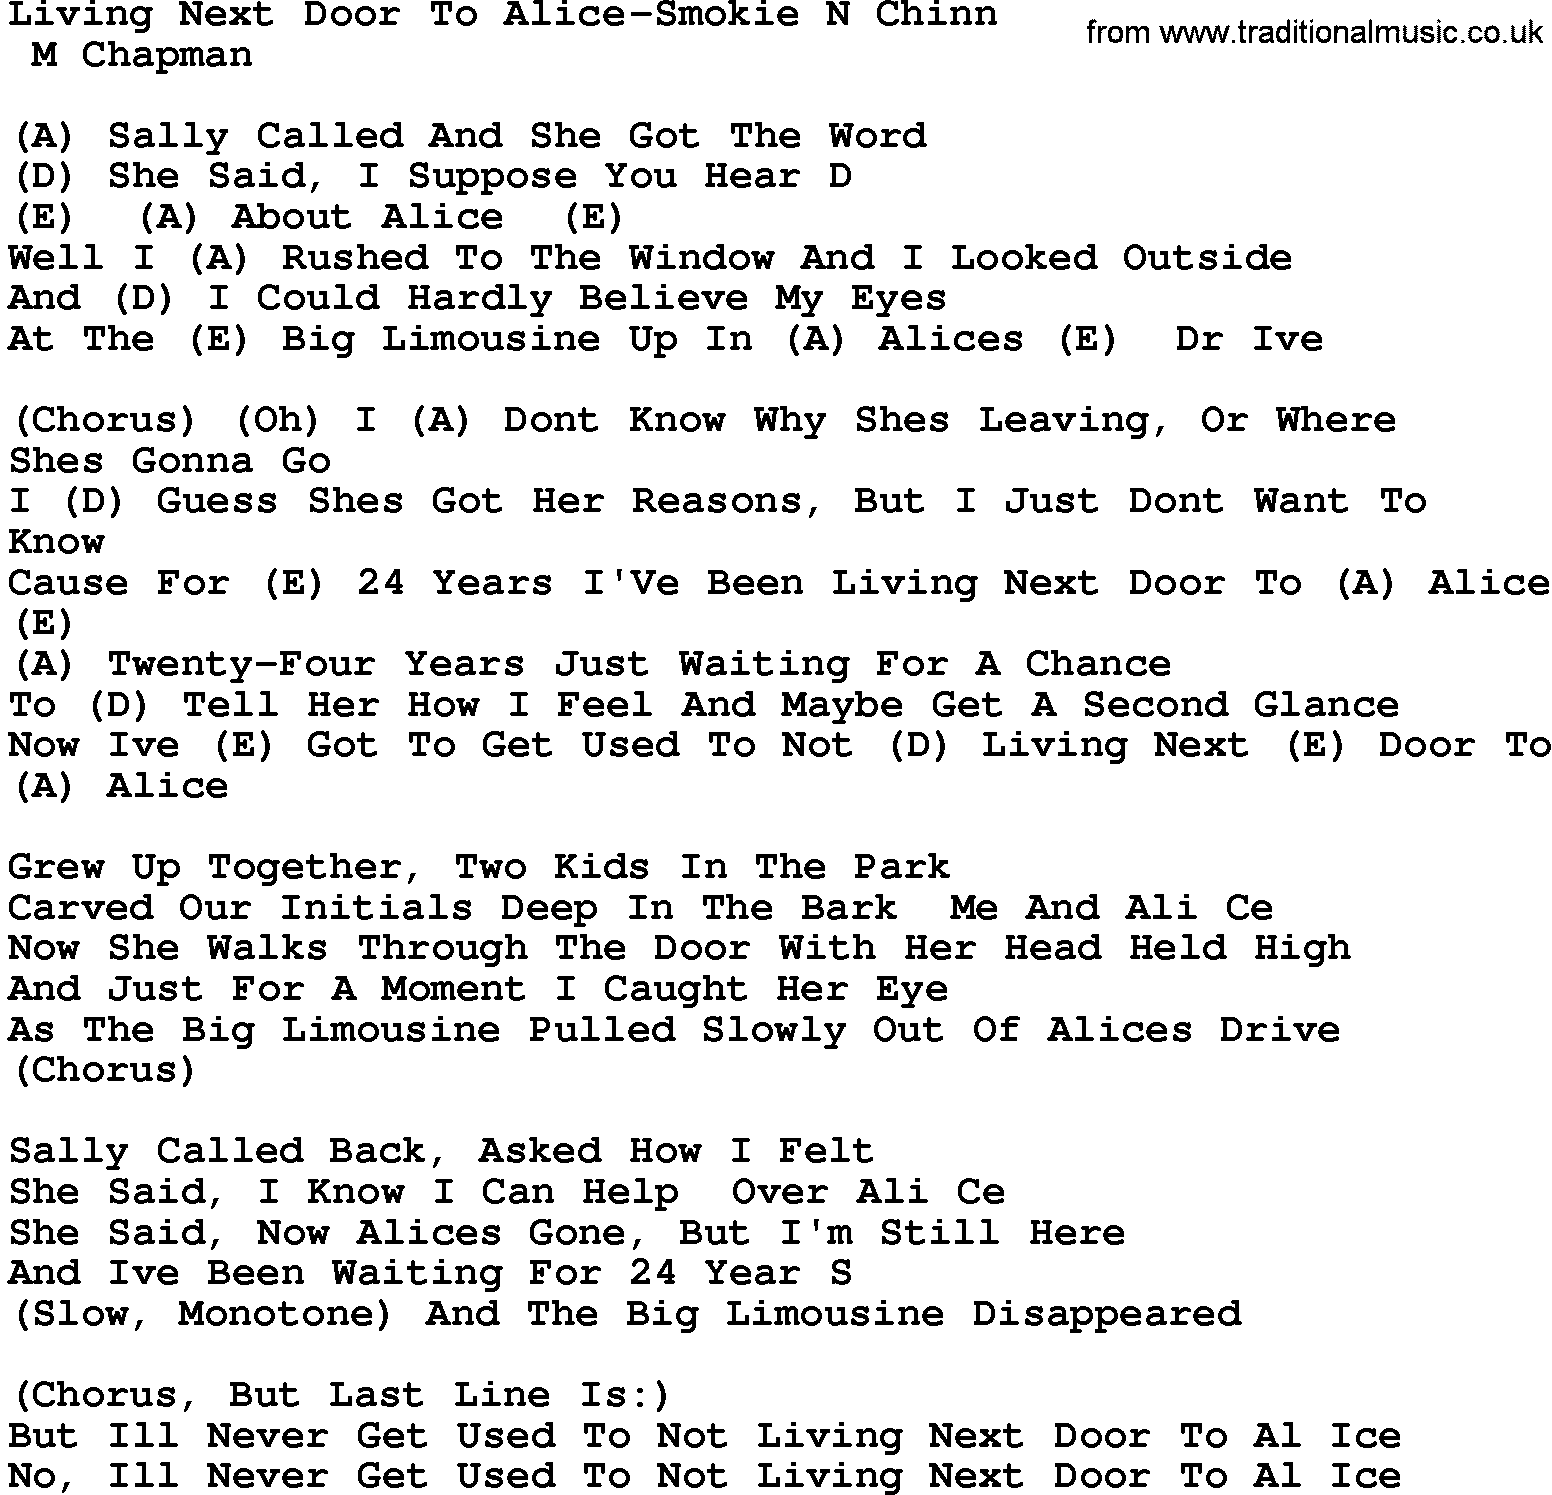 Country music song: Living Next Door To Alice-Smokie N Chinn lyrics and chords